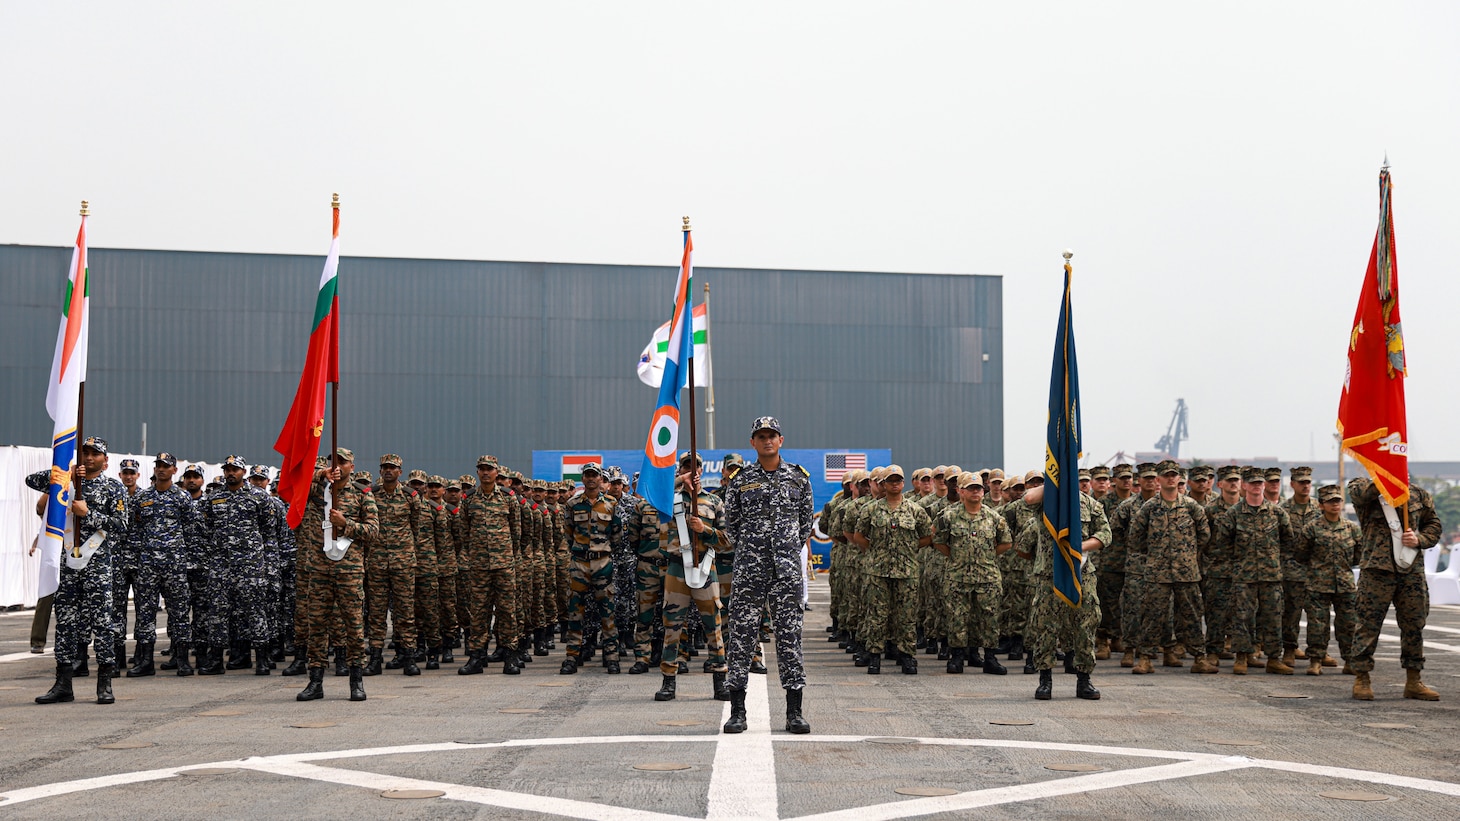 Republic of India service members, U.S. Marines assigned to the 15th Marine Expeditionary Unit, and Sailors assigned to the amphibious transport dock USS Somerset (LPD 25), stand together in formation during the opening ceremony of Exercise Tiger TRIUMPH in Visakhapatnam, India, March 19, 2024. Tiger TRIUMPH is a U.S.-India tri-service amphibious exercise focused on humanitarian assistance and disaster relief readiness and interoperability. Tiger TRIUMPH enables U.S. and Indian Armed Forces to improve interoperability and bilateral, joint, and service readiness in the Indian Ocean region and beyond to better achieve mutual regional security objectives. (U.S. Marine Corps photo by Cpl. Aidan Hekker)